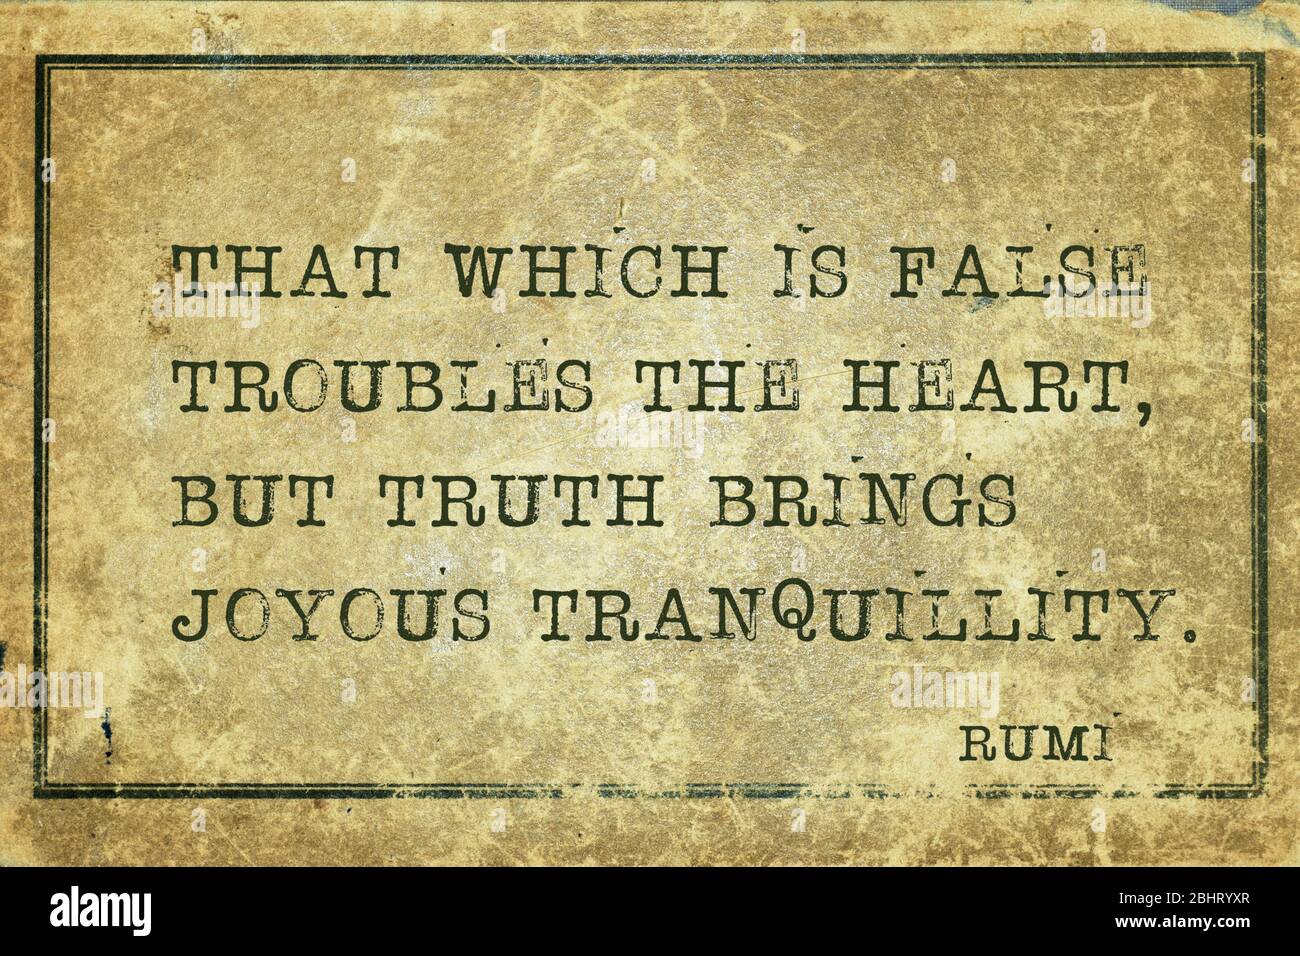 That which is false troubles the heart, but truth brings joyous tranquillity - ancient Persian poet and philosopher Rumi quote printed on grunge vinta Stock Photo